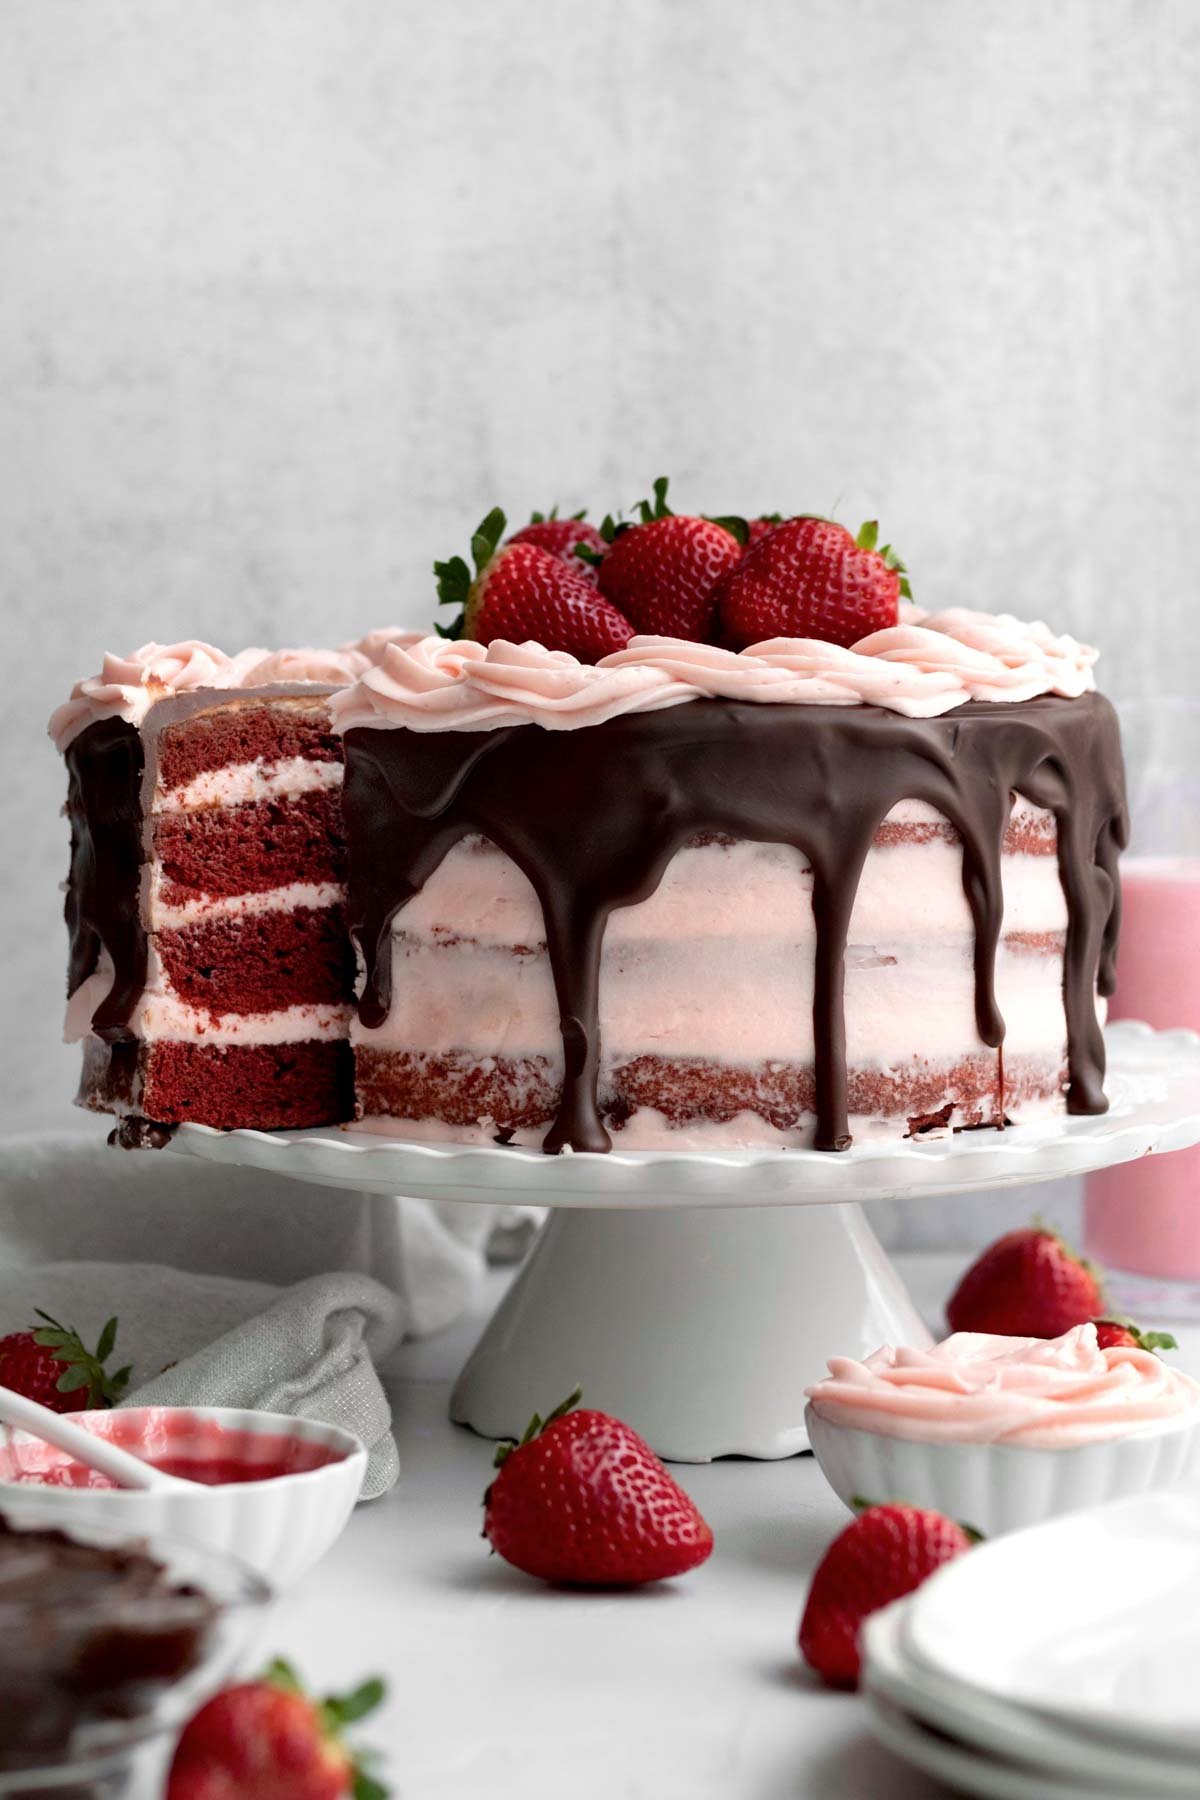 A slice of Strawberry Red Velvet Cake pulled from the whole.